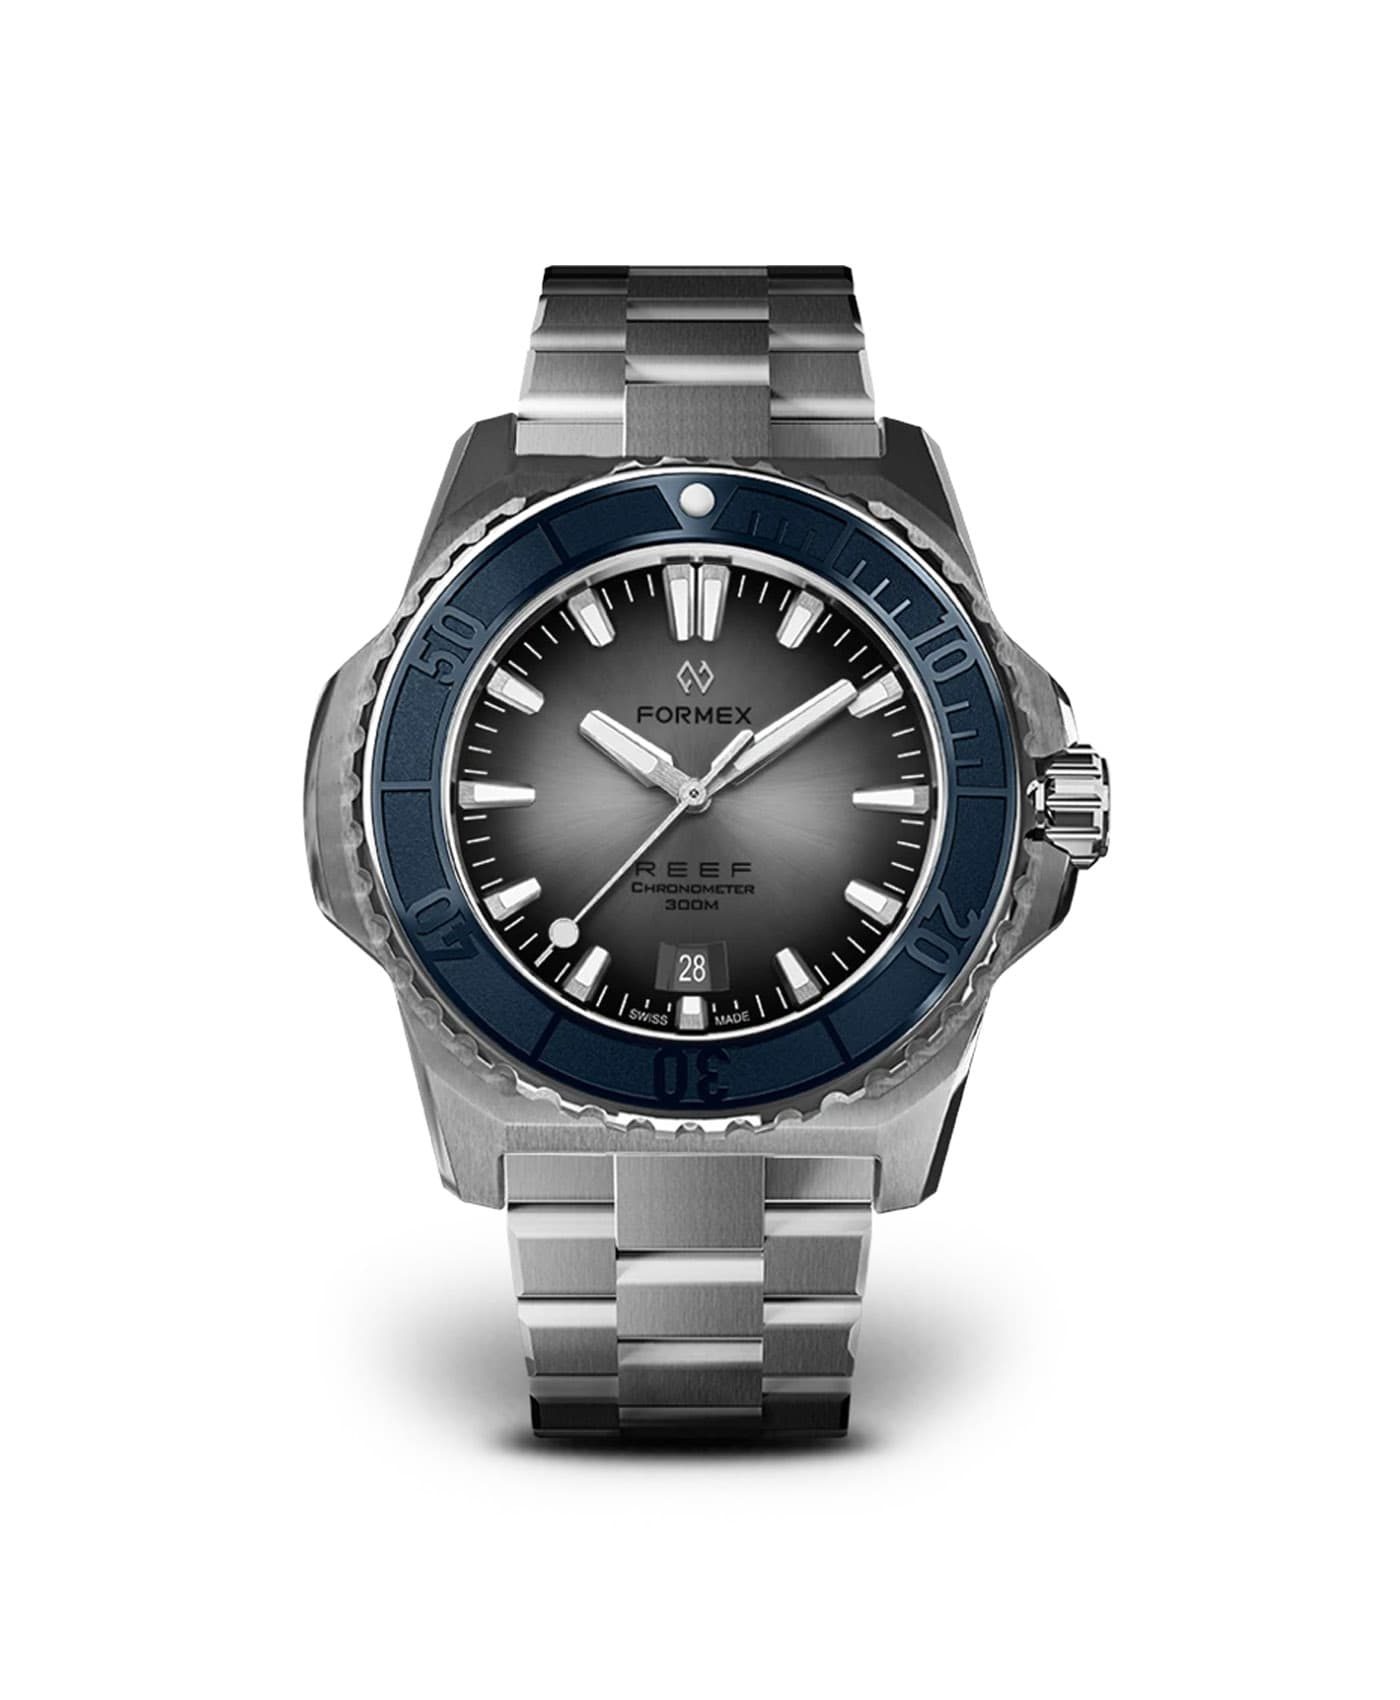 Formex - Reef - Automatic Chronometer COSC 300m_Grey Dial Blue Bezel